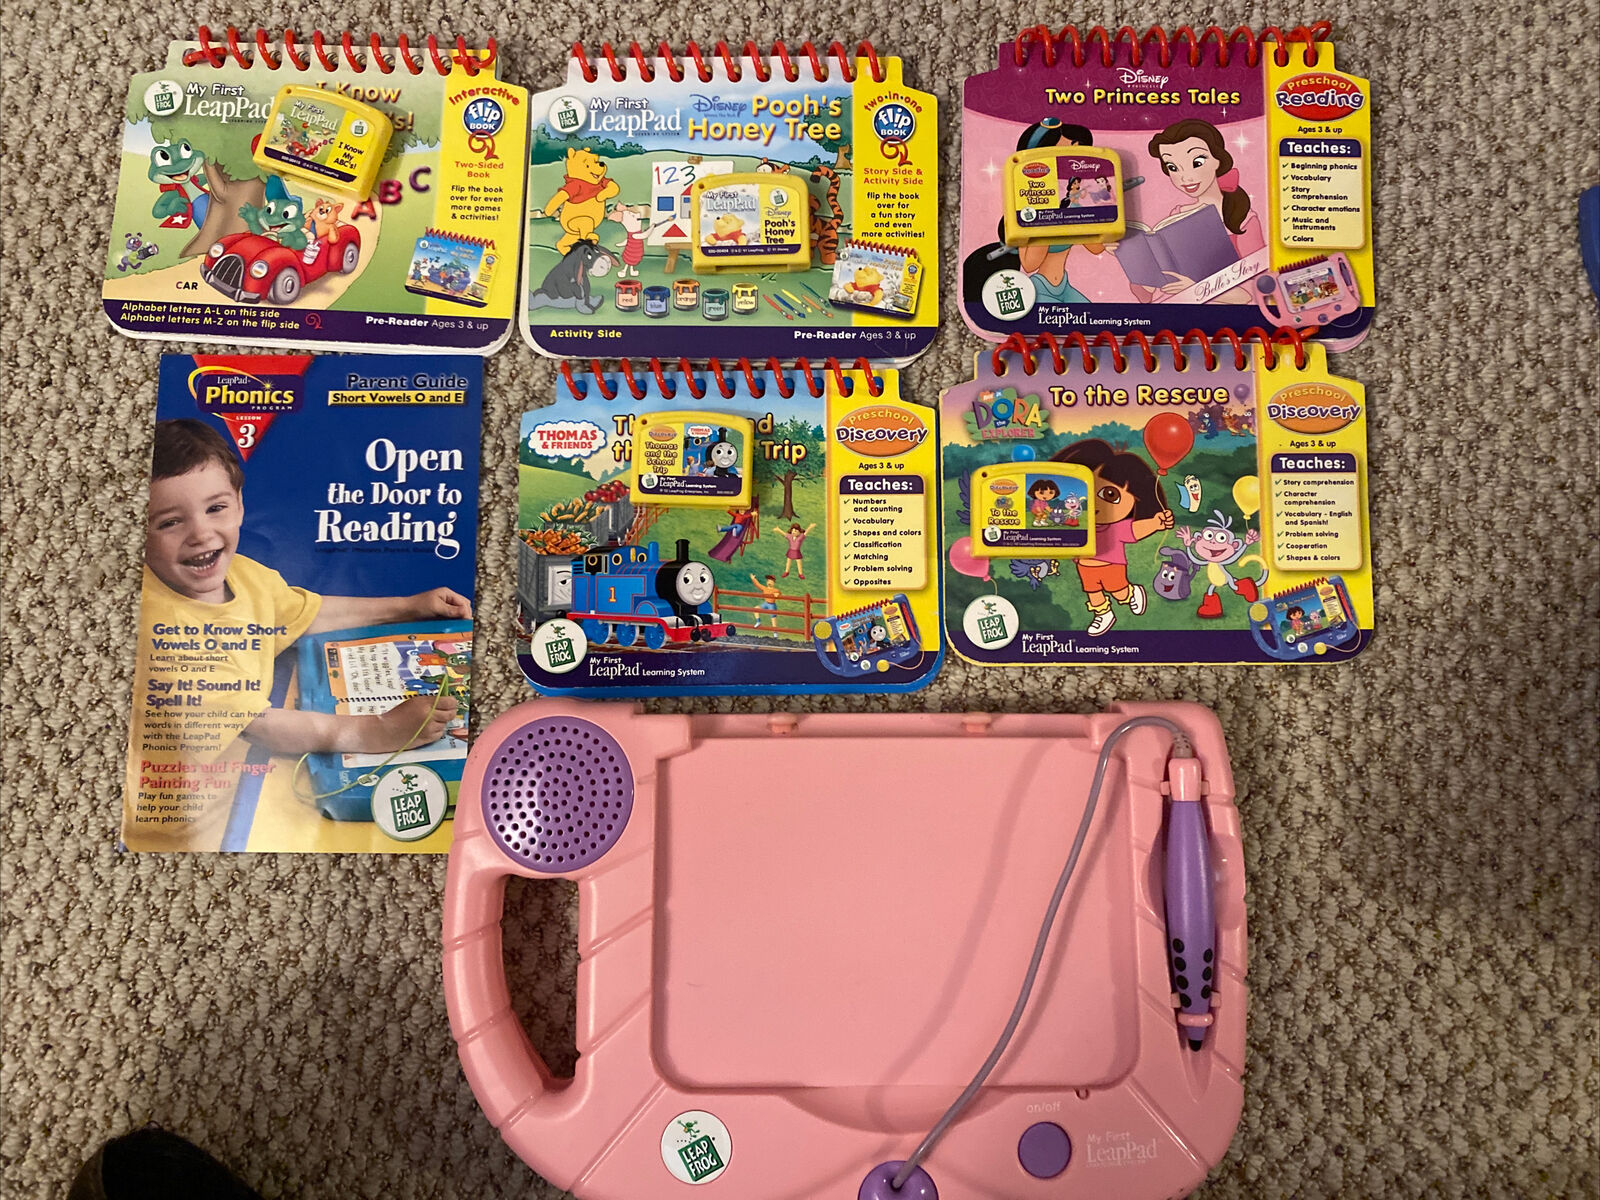 Leapfrog My First Leappad Handheld Learning System Reader Pink, 5 Games + Books